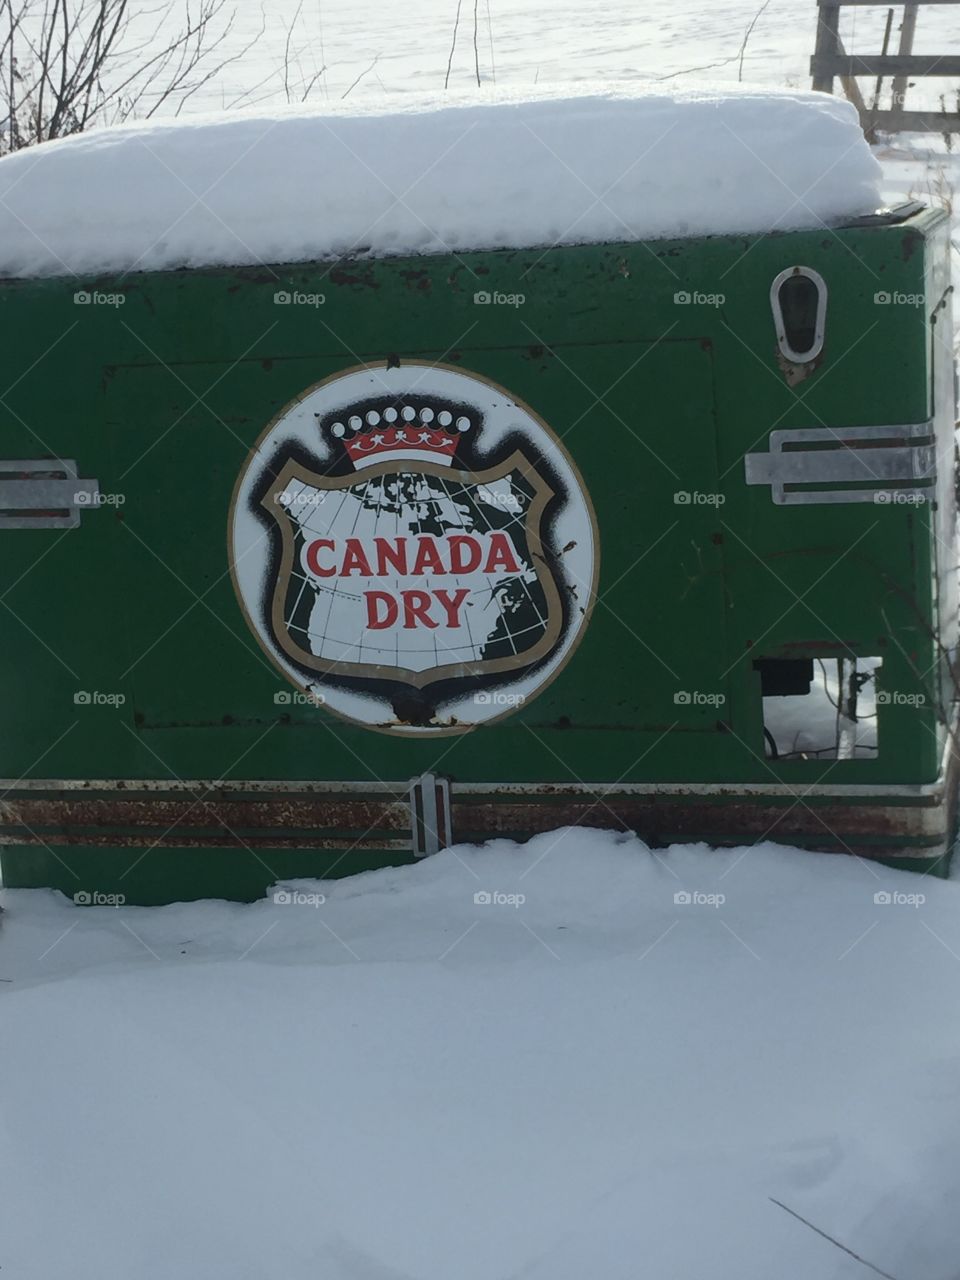 Now this is sweet vintage old Canada dry pop cooler this is a real Gem.